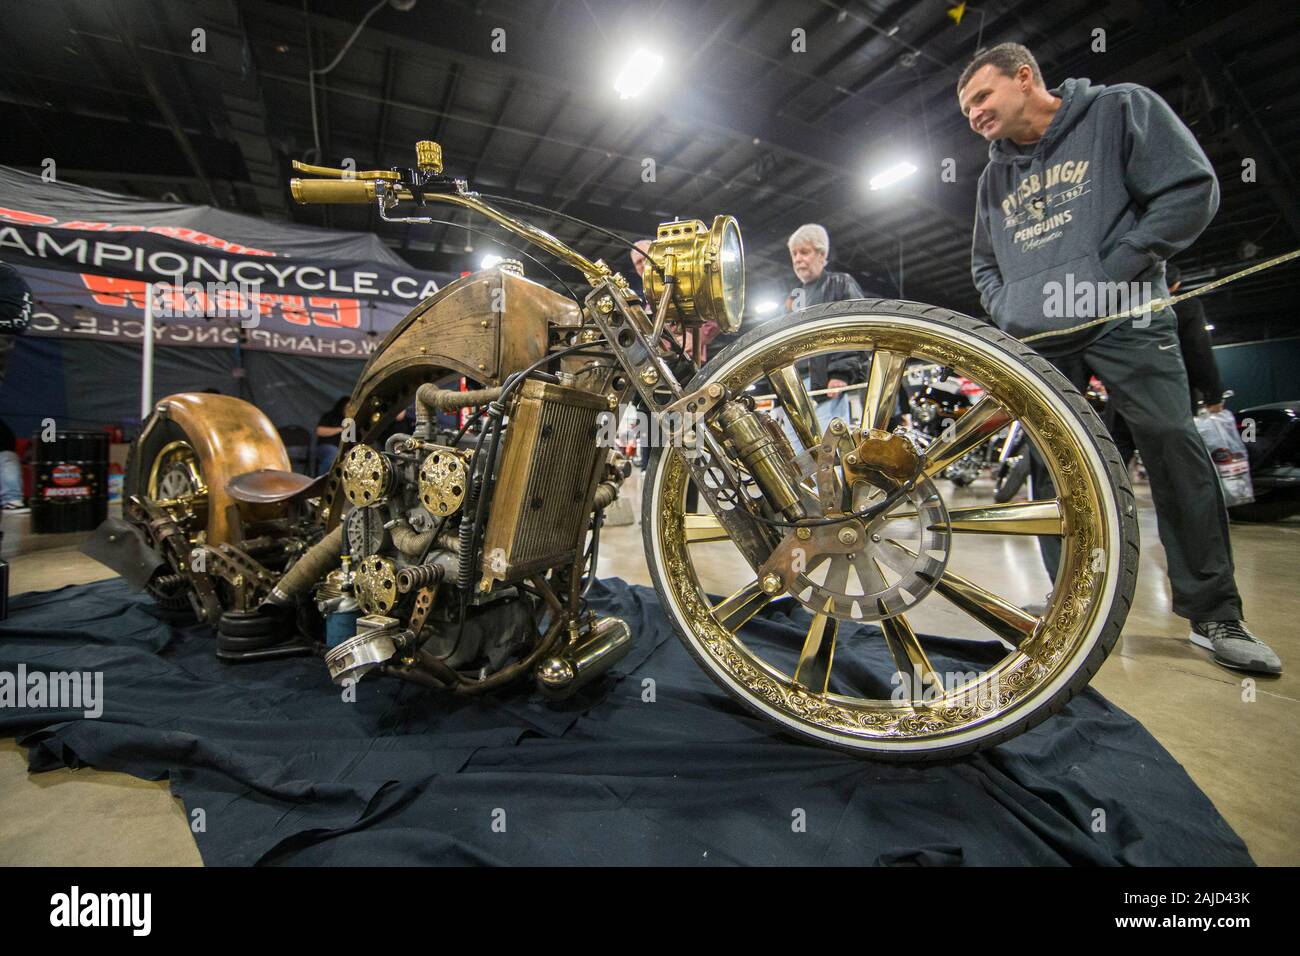 Sjældent i det mindste Mand Toronto, Canada. 3rd Jan, 2020. People view a custom motorcycle at the 2020  North American International Motorcycle Supershow in Toronto, Canada, on  Jan. 3, 2020. The annual three-day motorcycle show was held